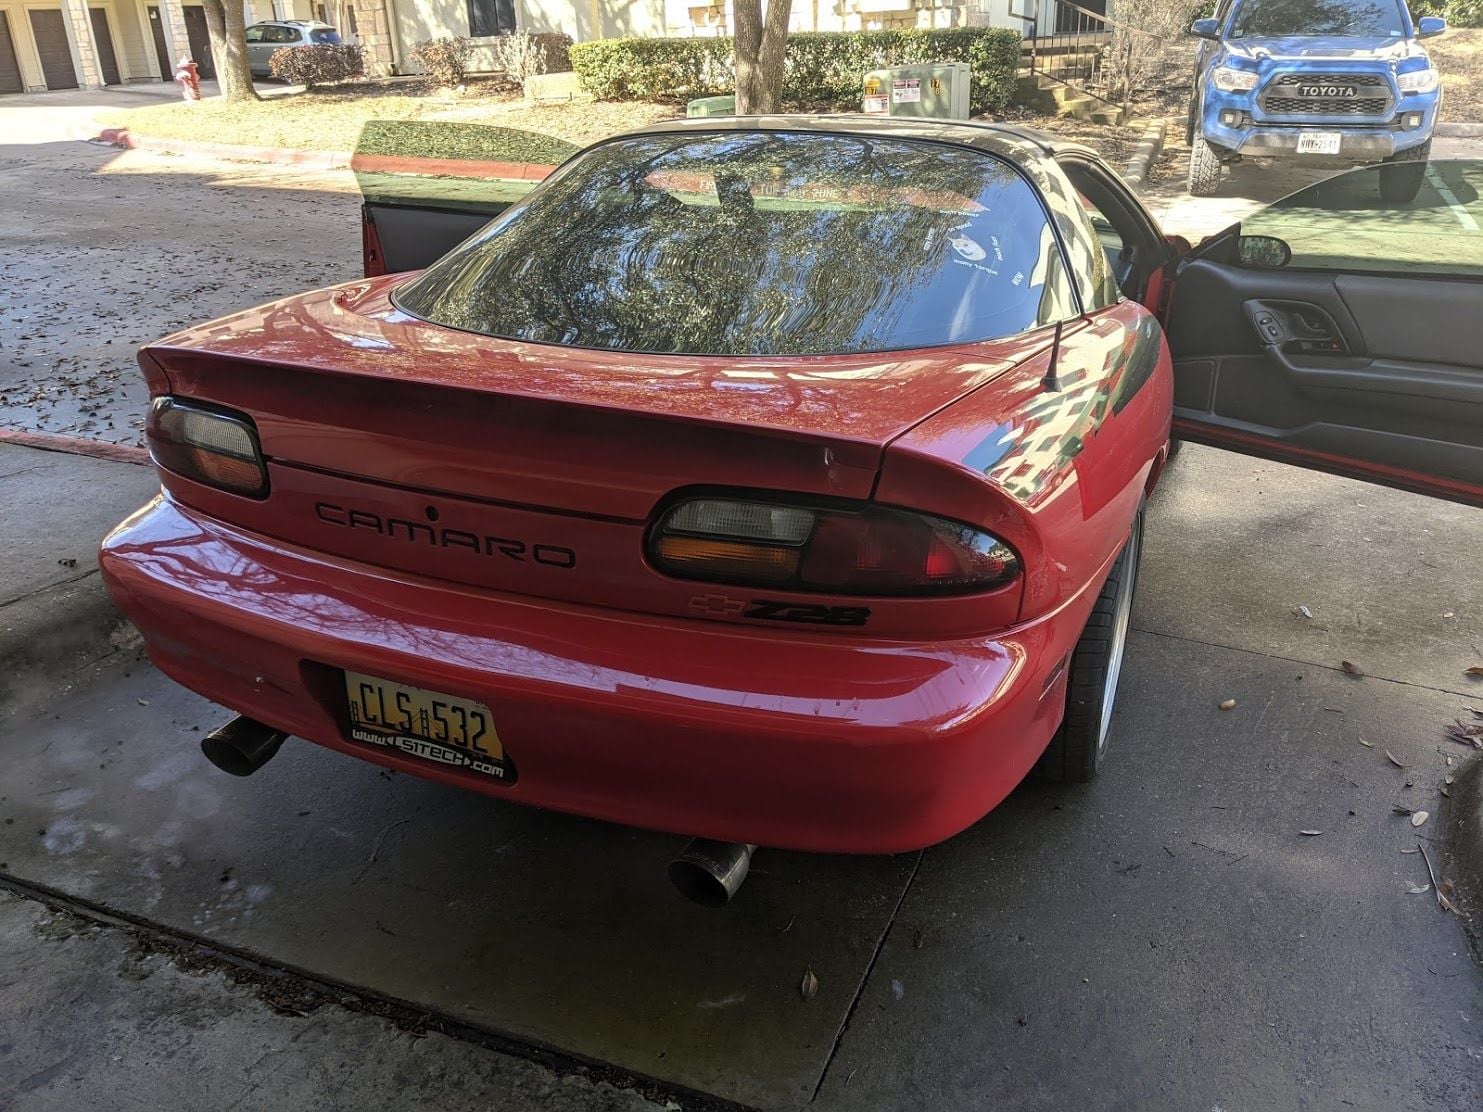 1999 Chevrolet Camaro - 1999 z28 Modified - Used - VIN 2G1FP22G3X2133915 - 8 cyl - 2WD - Manual - Coupe - Red - Austin, TX 78735, United States